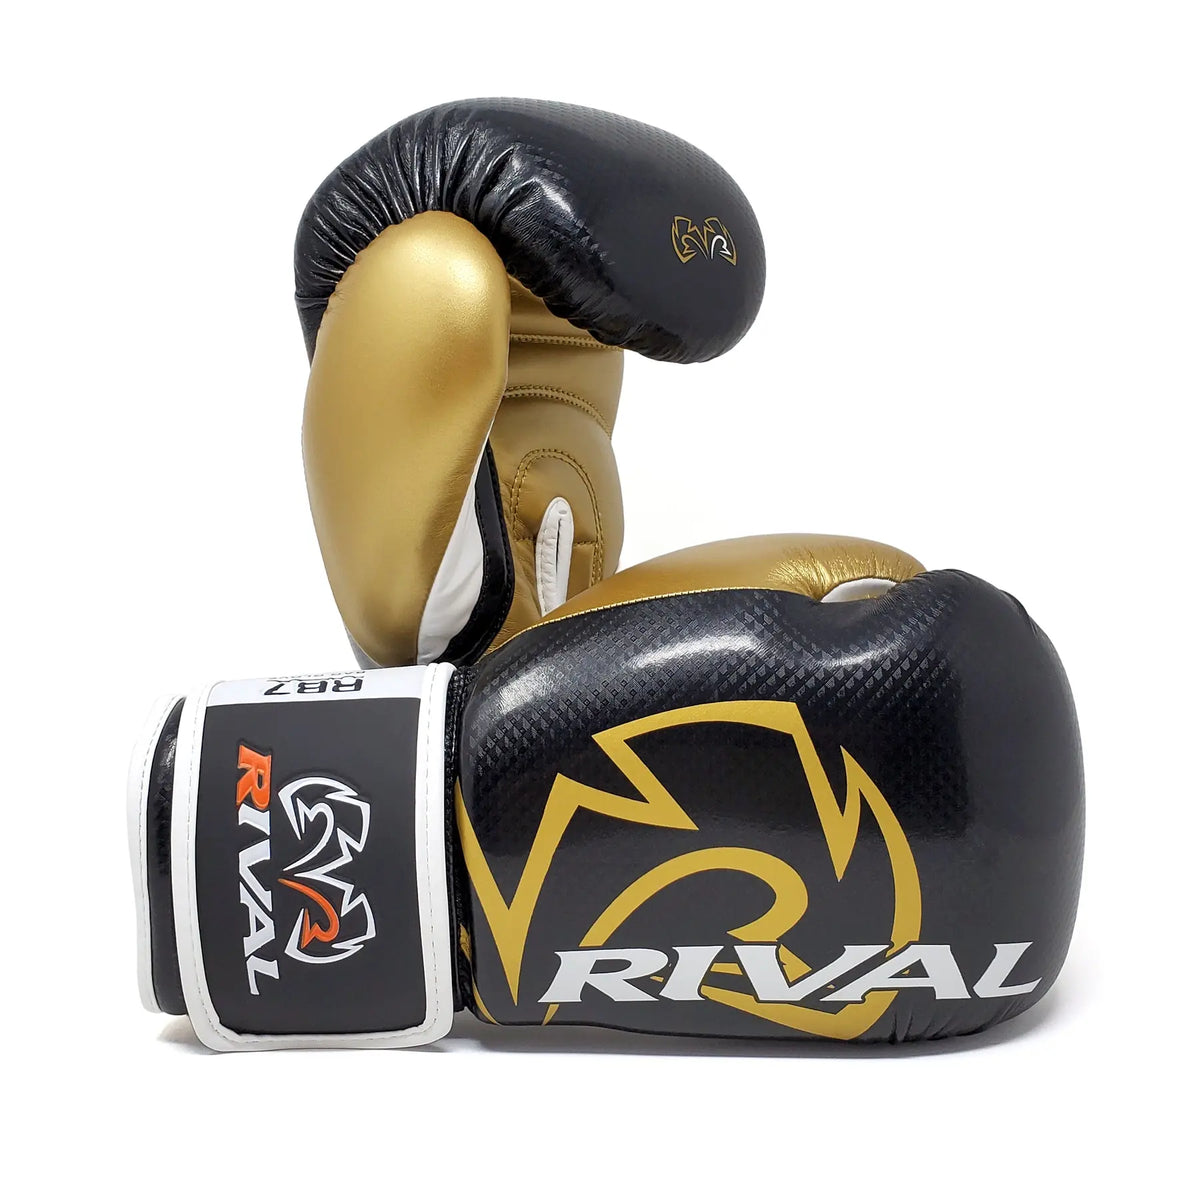 narrow-raven714: a pug with boxing gloves